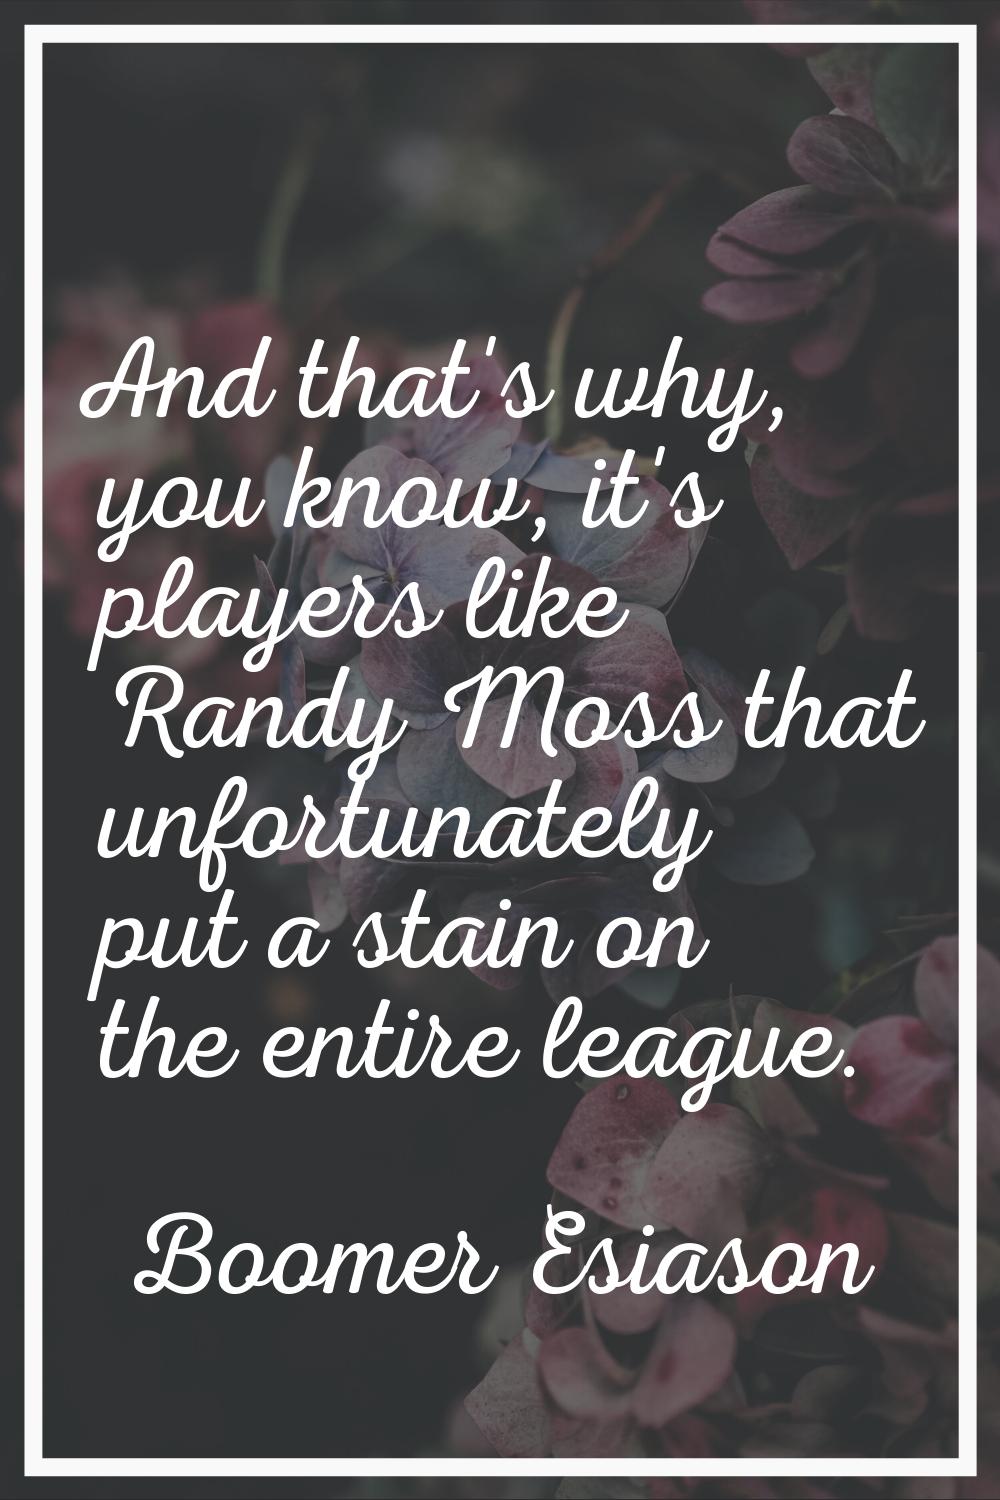 And that's why, you know, it's players like Randy Moss that unfortunately put a stain on the entire